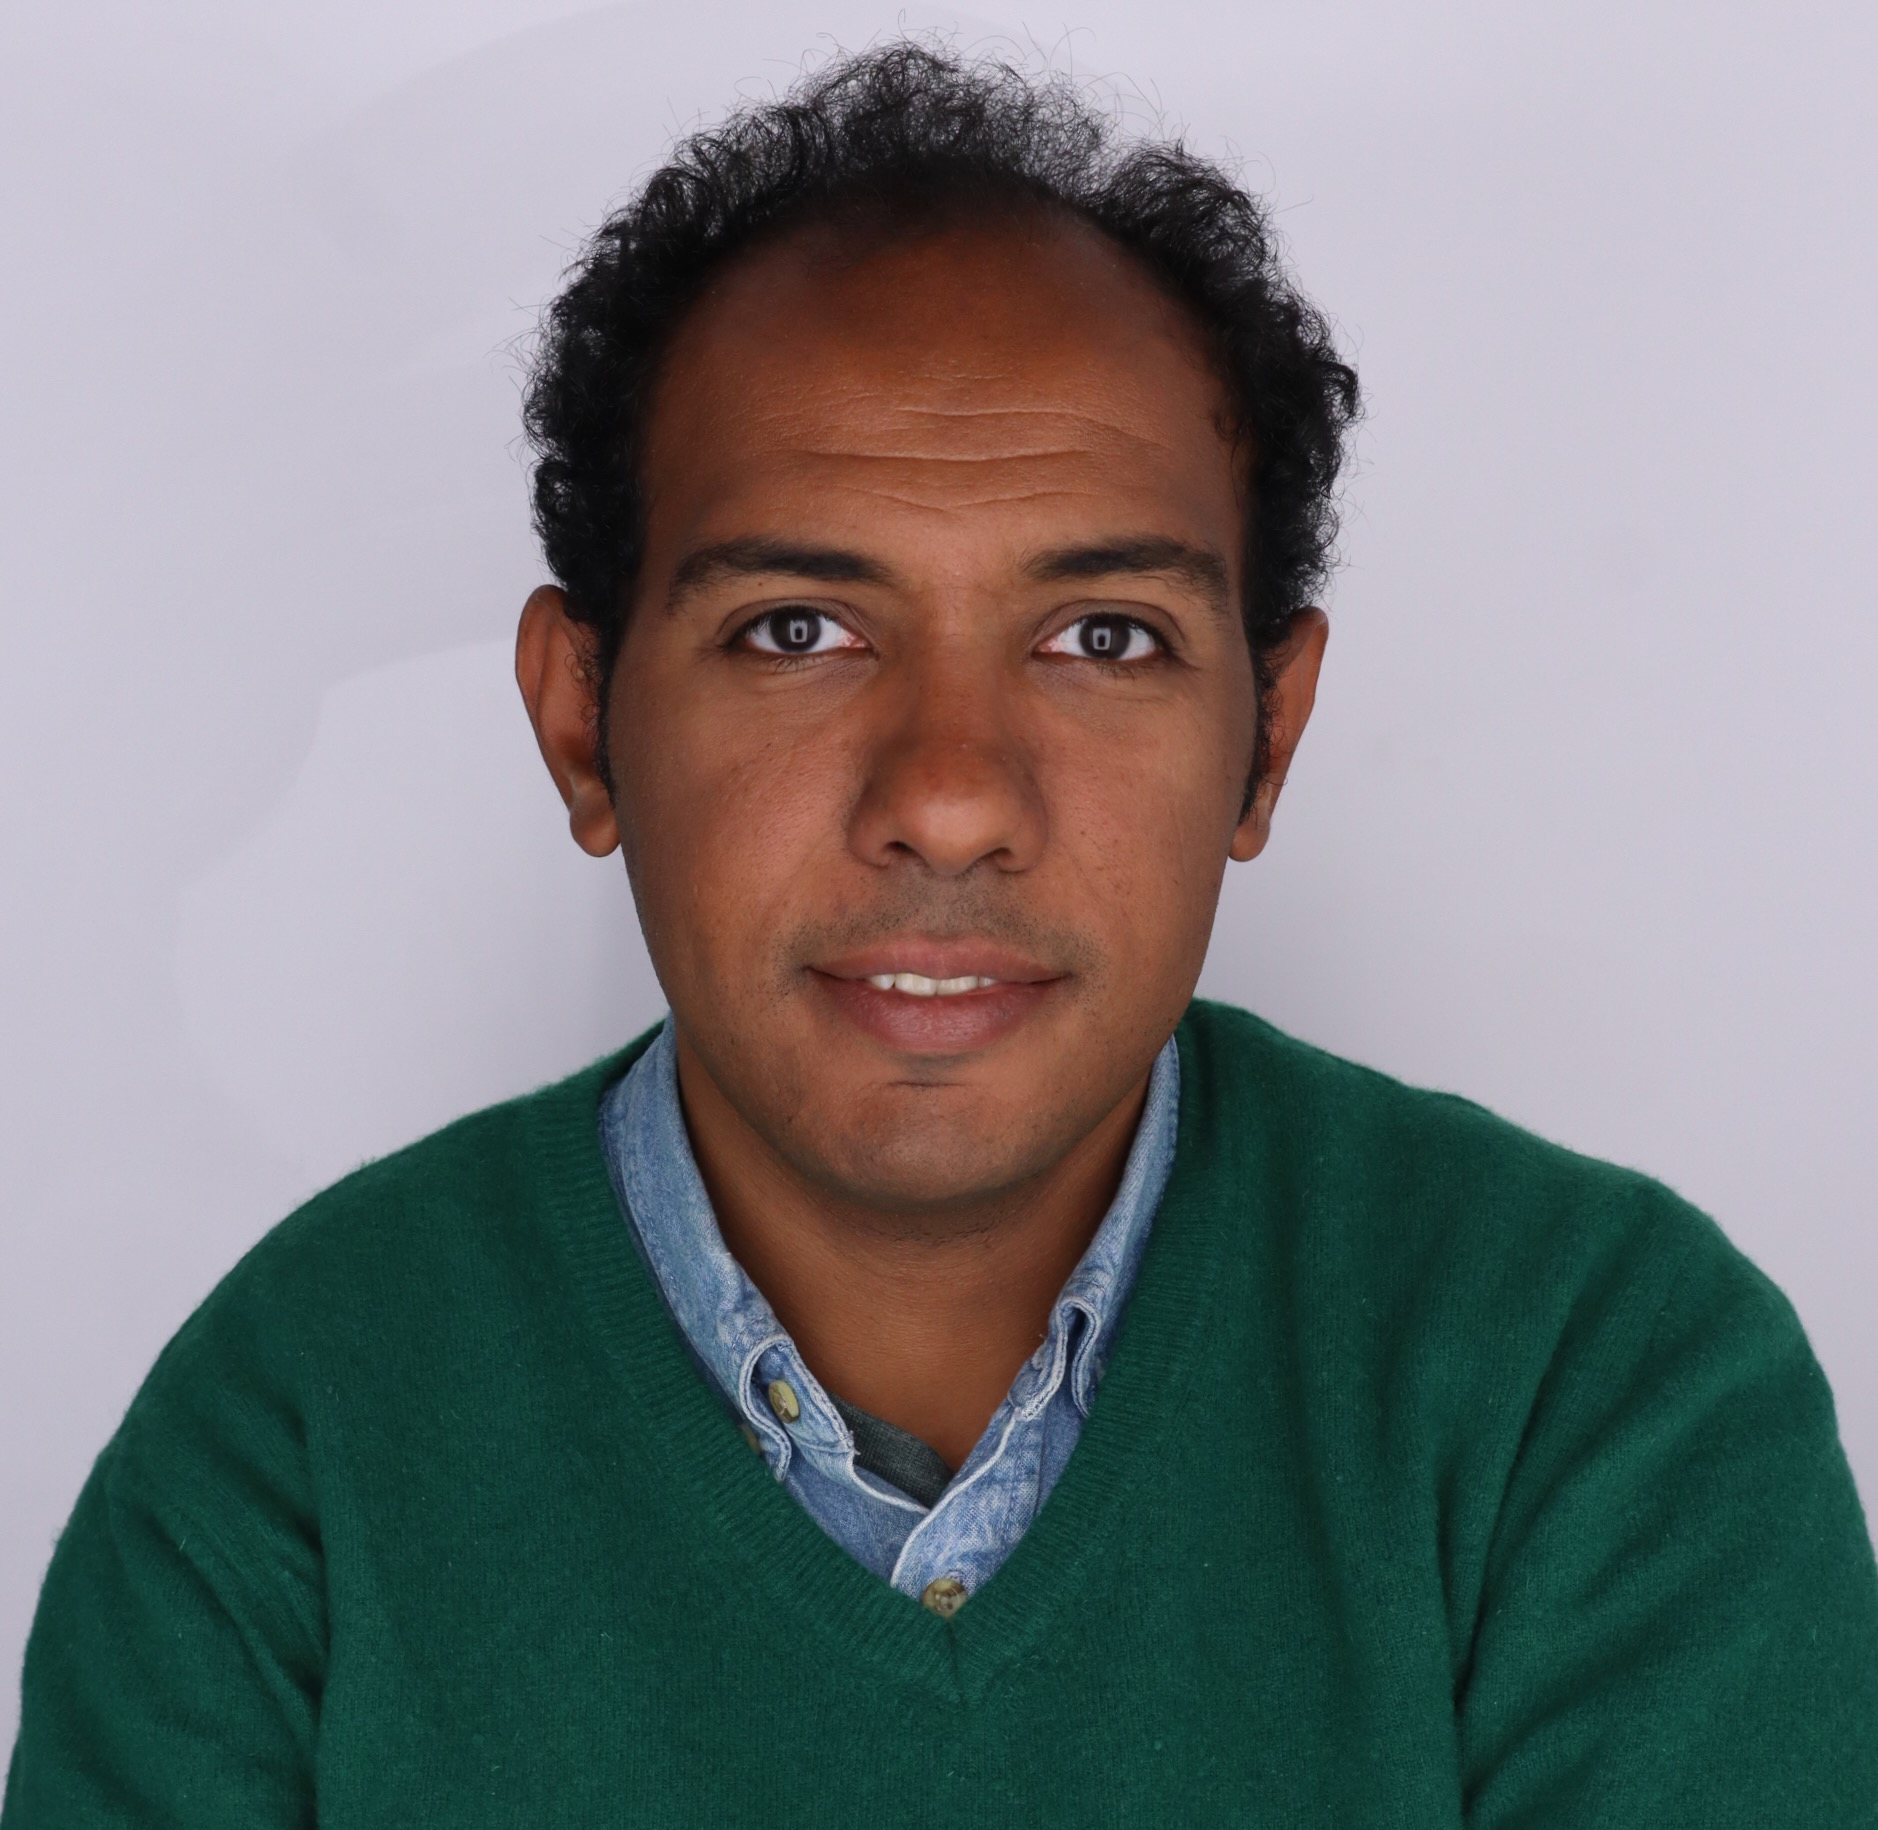 Portrait of Ahmed Hamed wearing a jeans shirt and a green pullover. The person has a rich dark skin tone